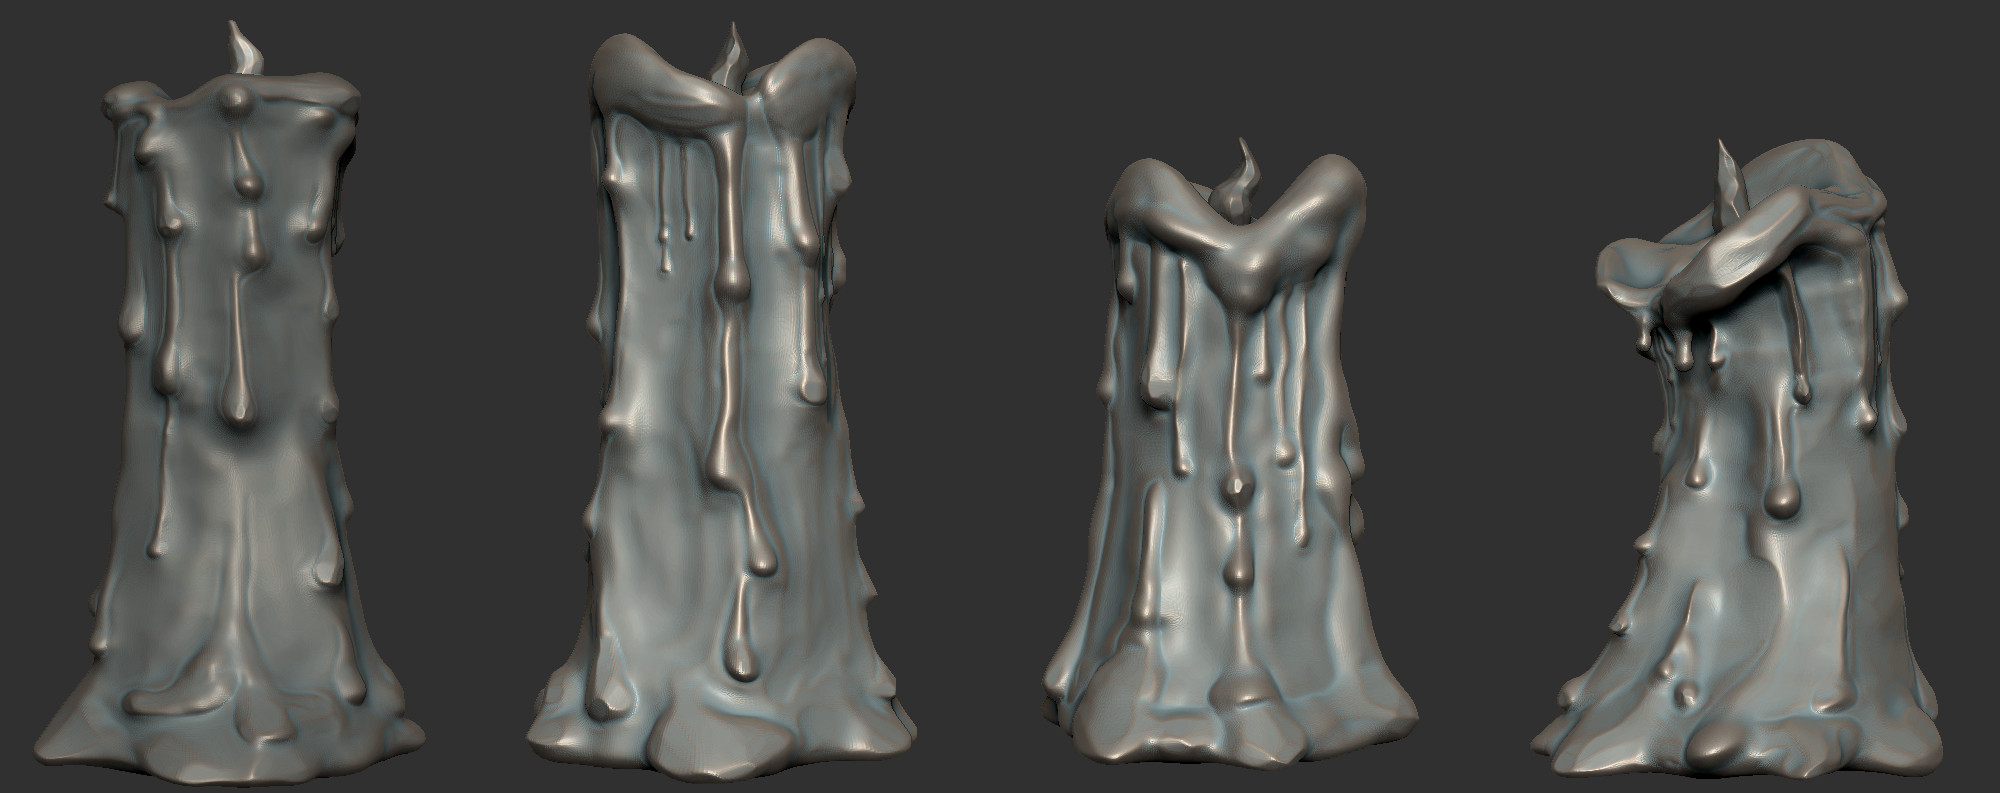 High poly sculpts of the individual candles, in Zbrush